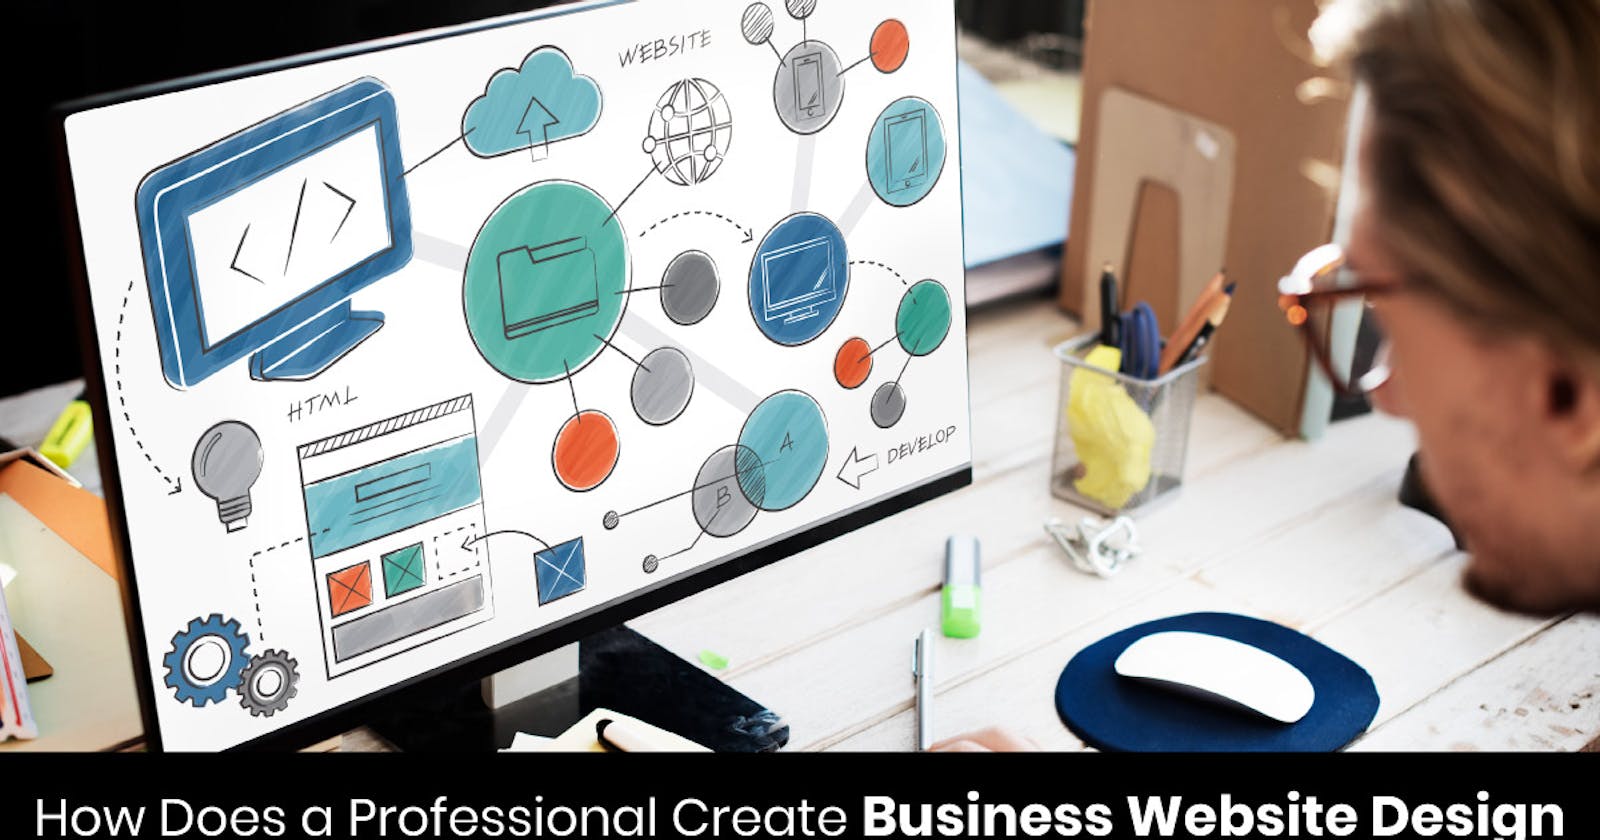 How Does a Professional Create Business Website Design?